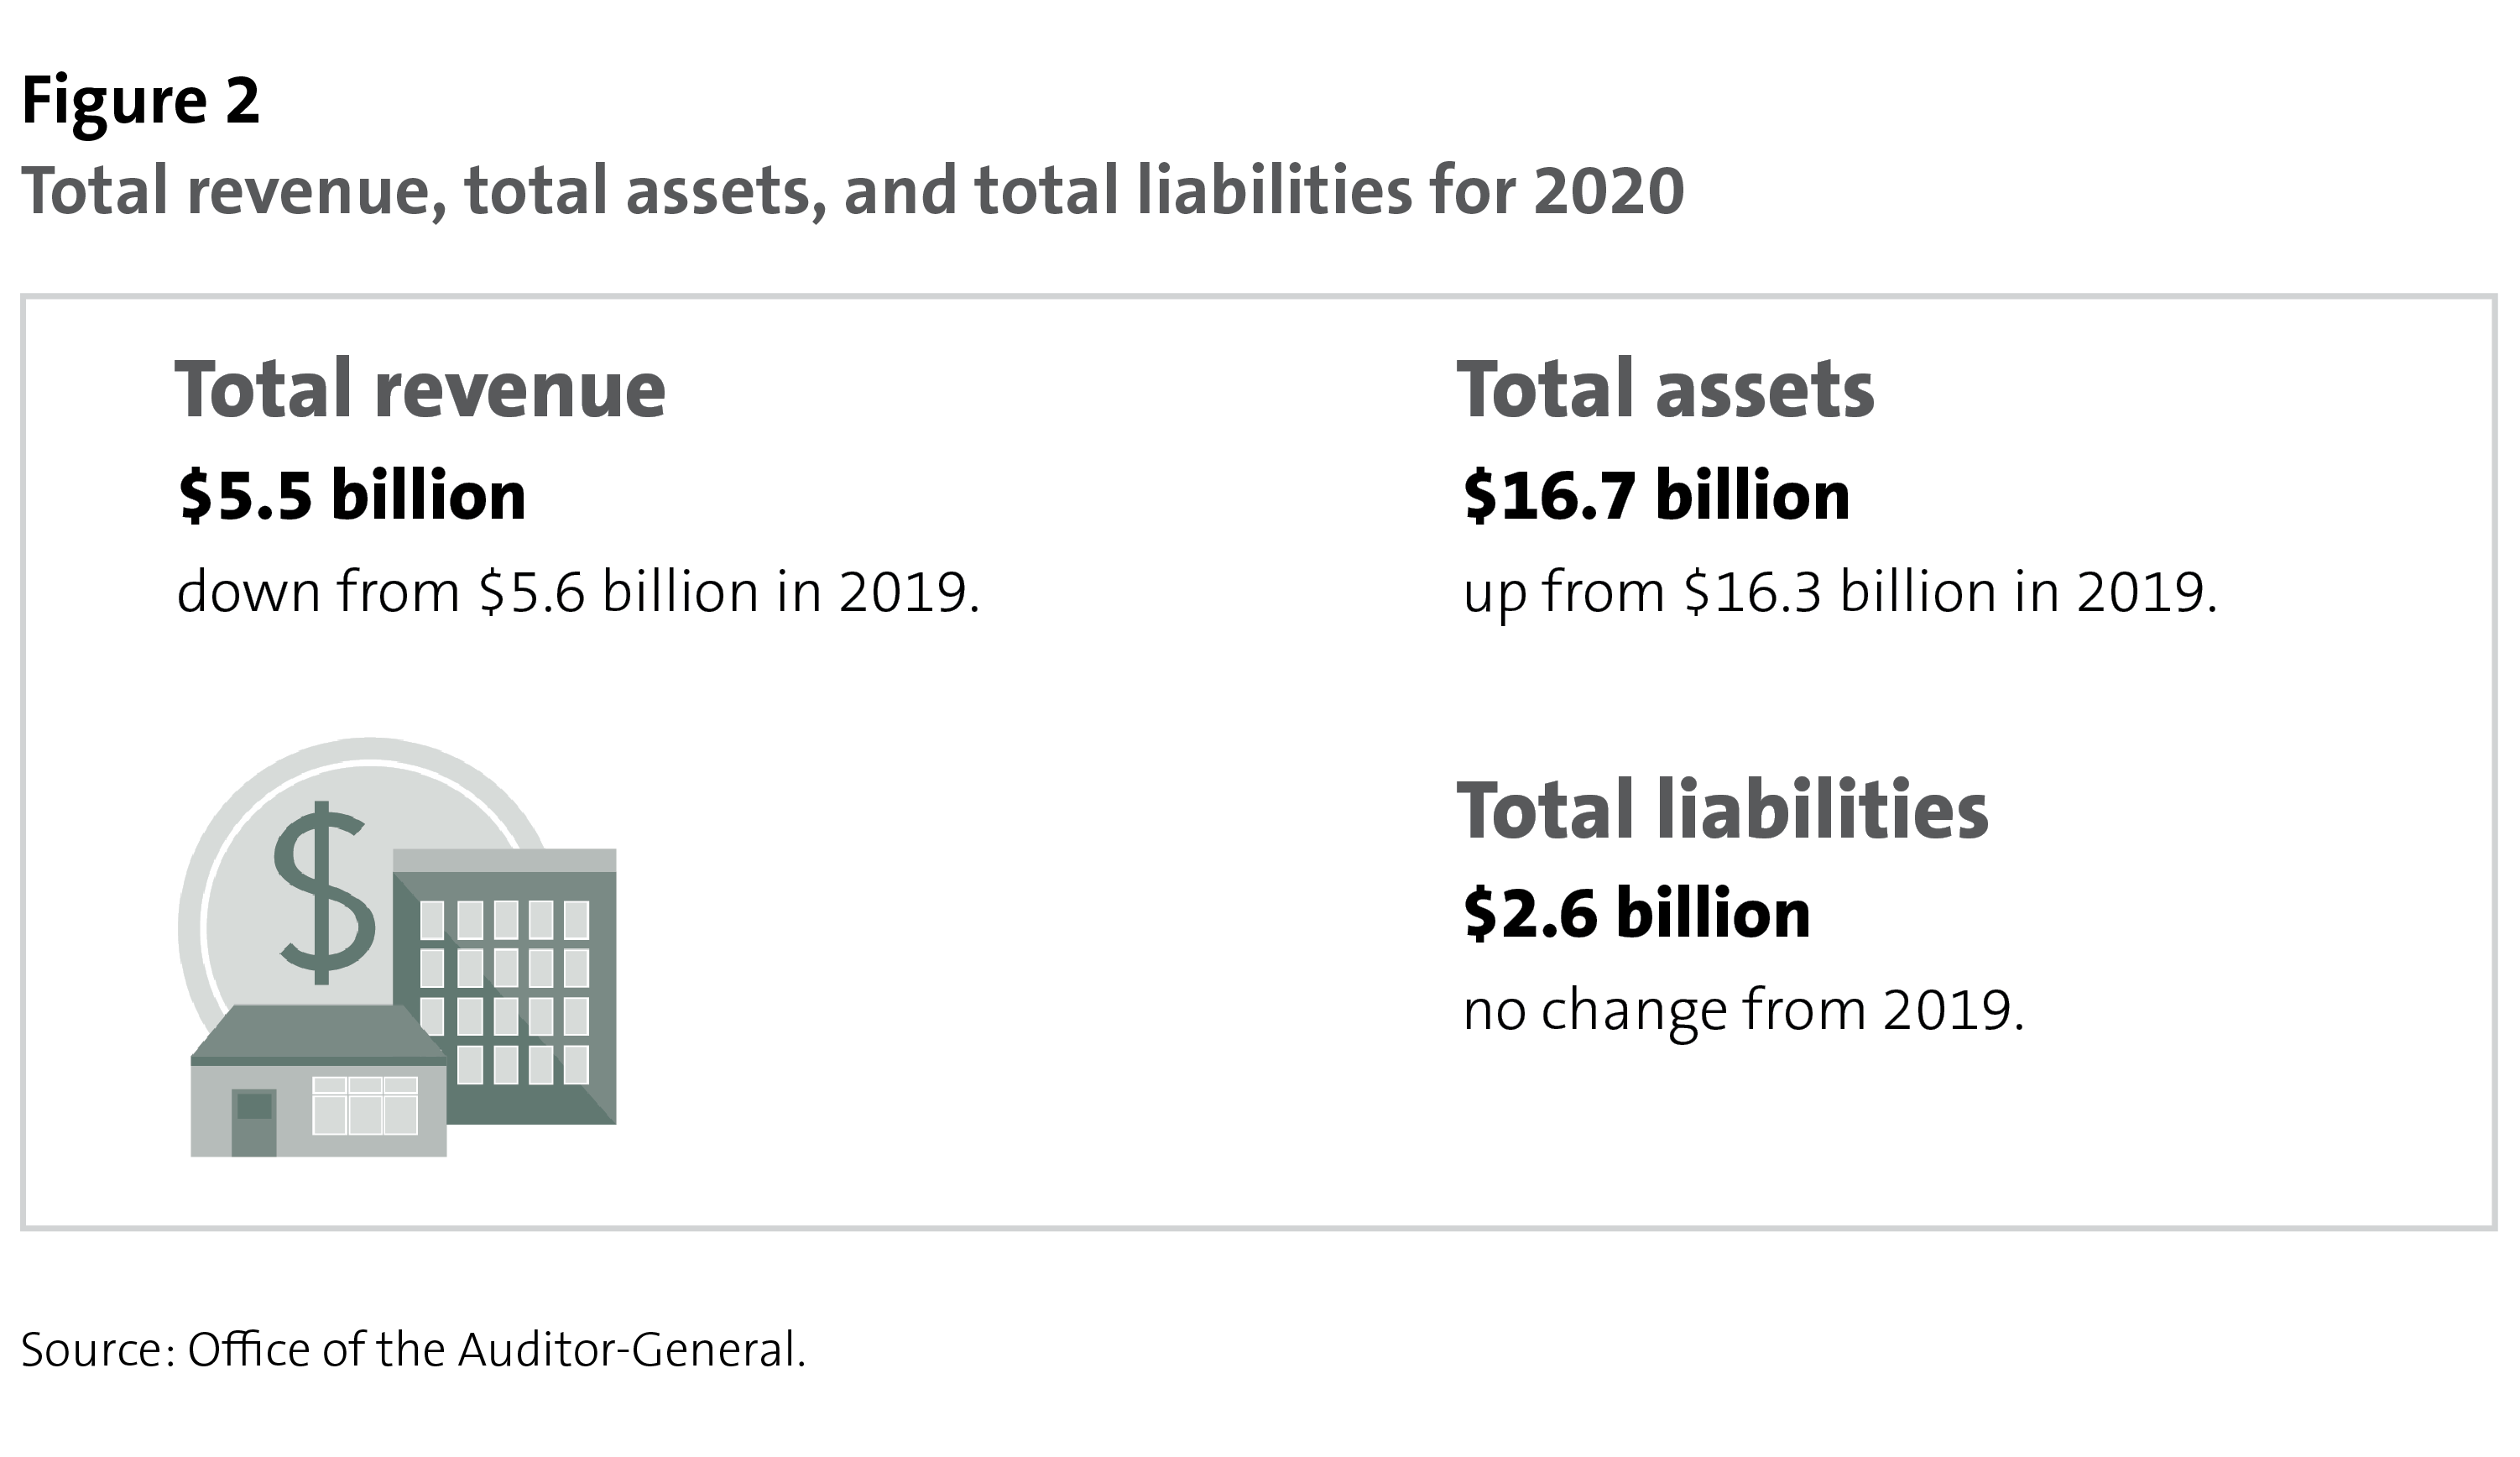 Figure 2: Total revenue, total assets, and total liabilities for 2020